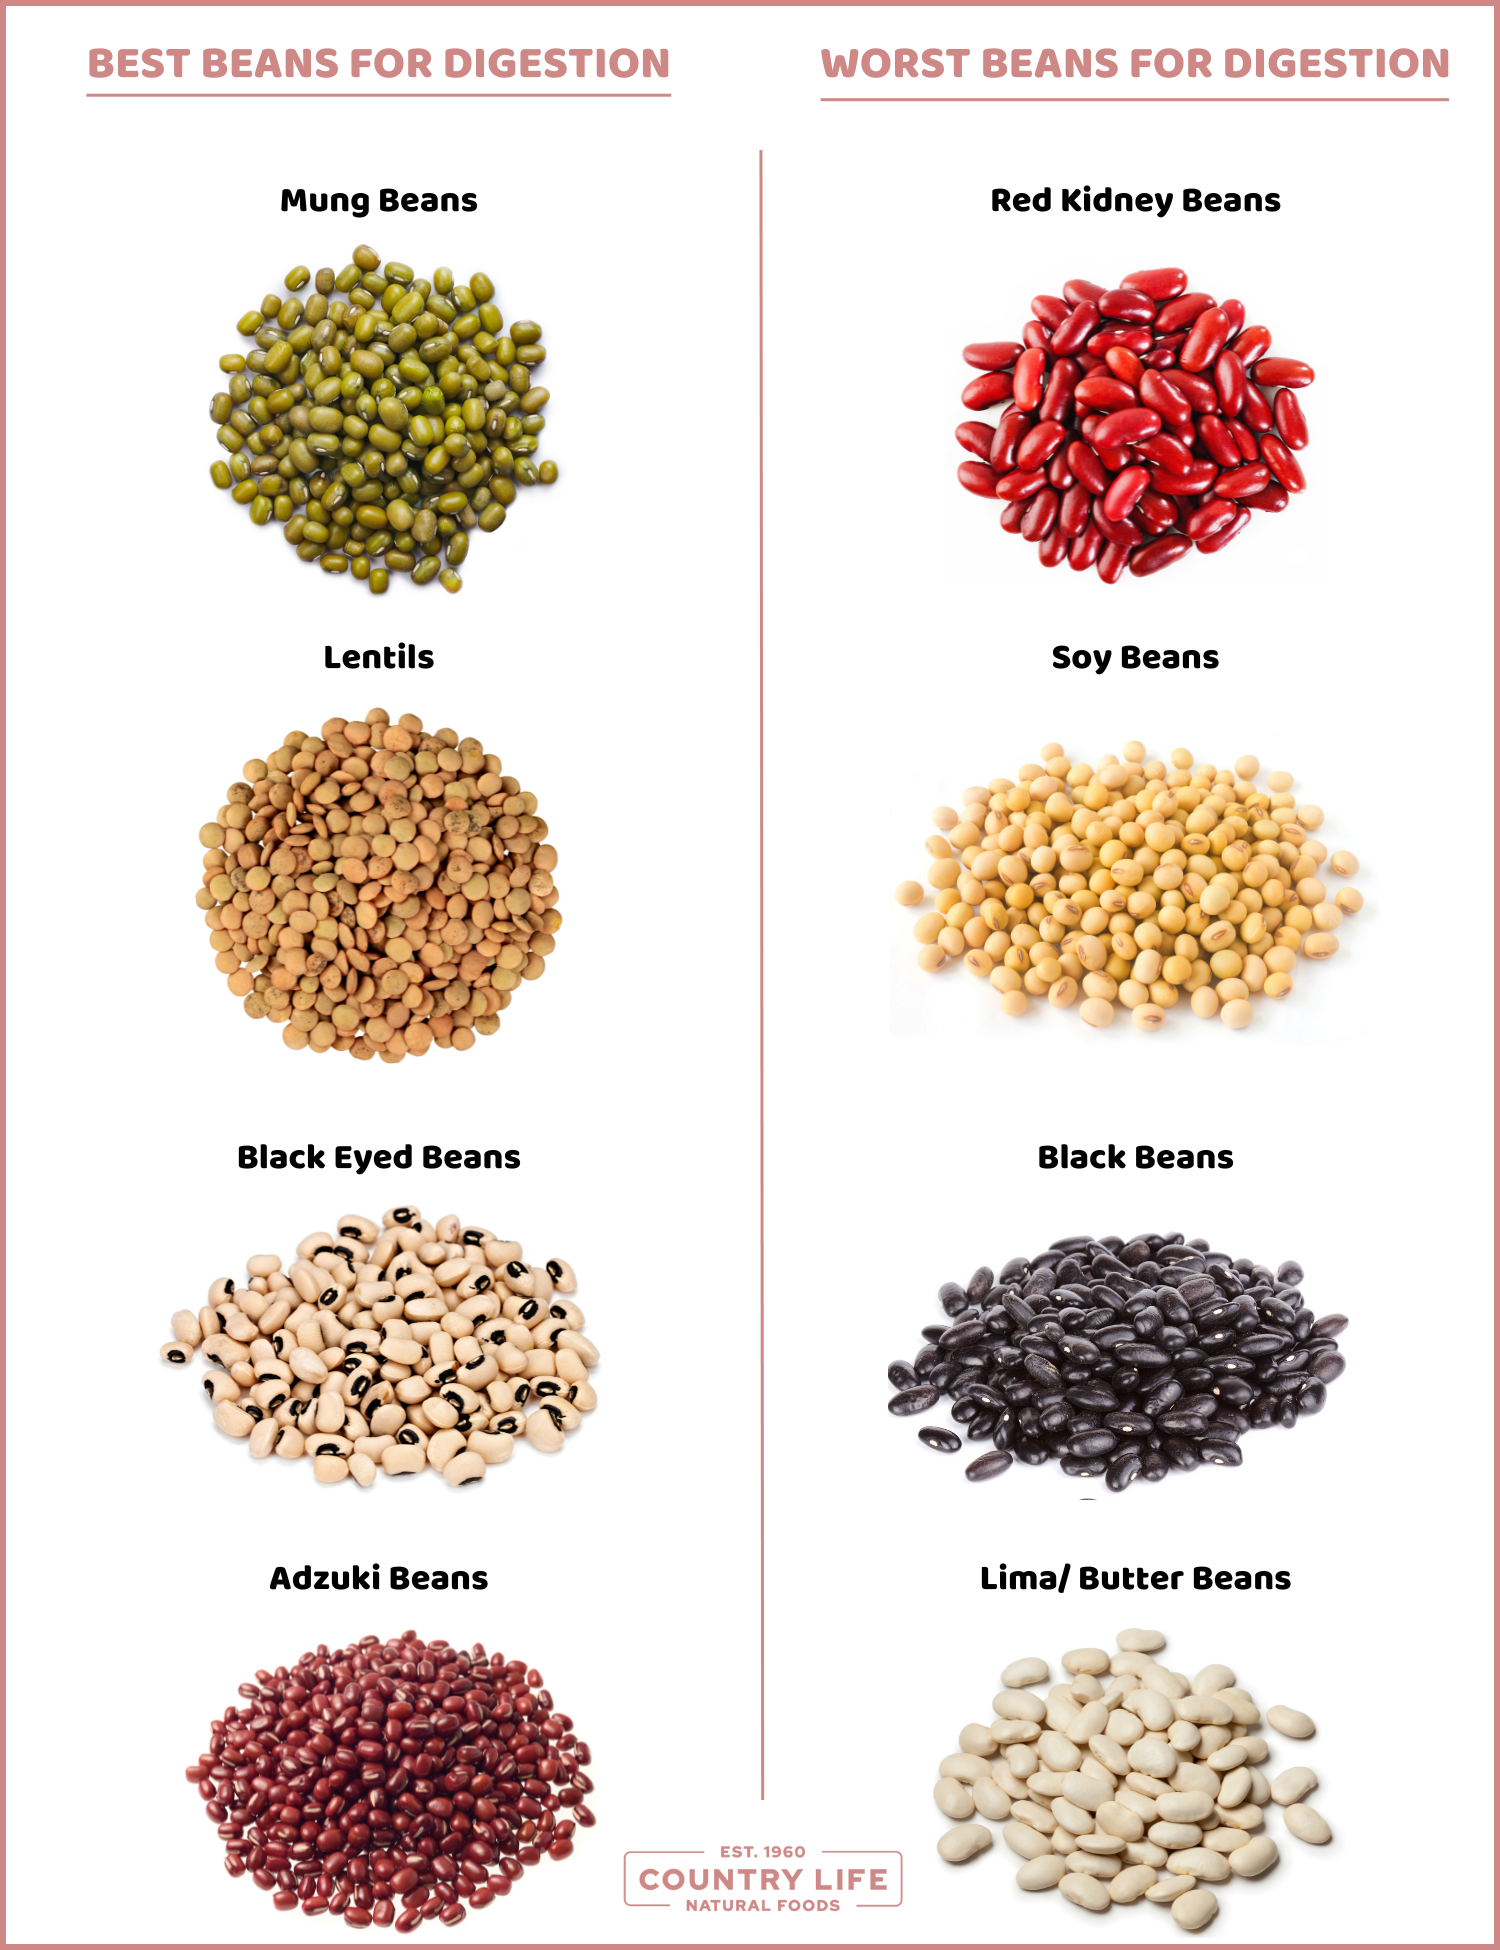 the best and worst beans for digestion